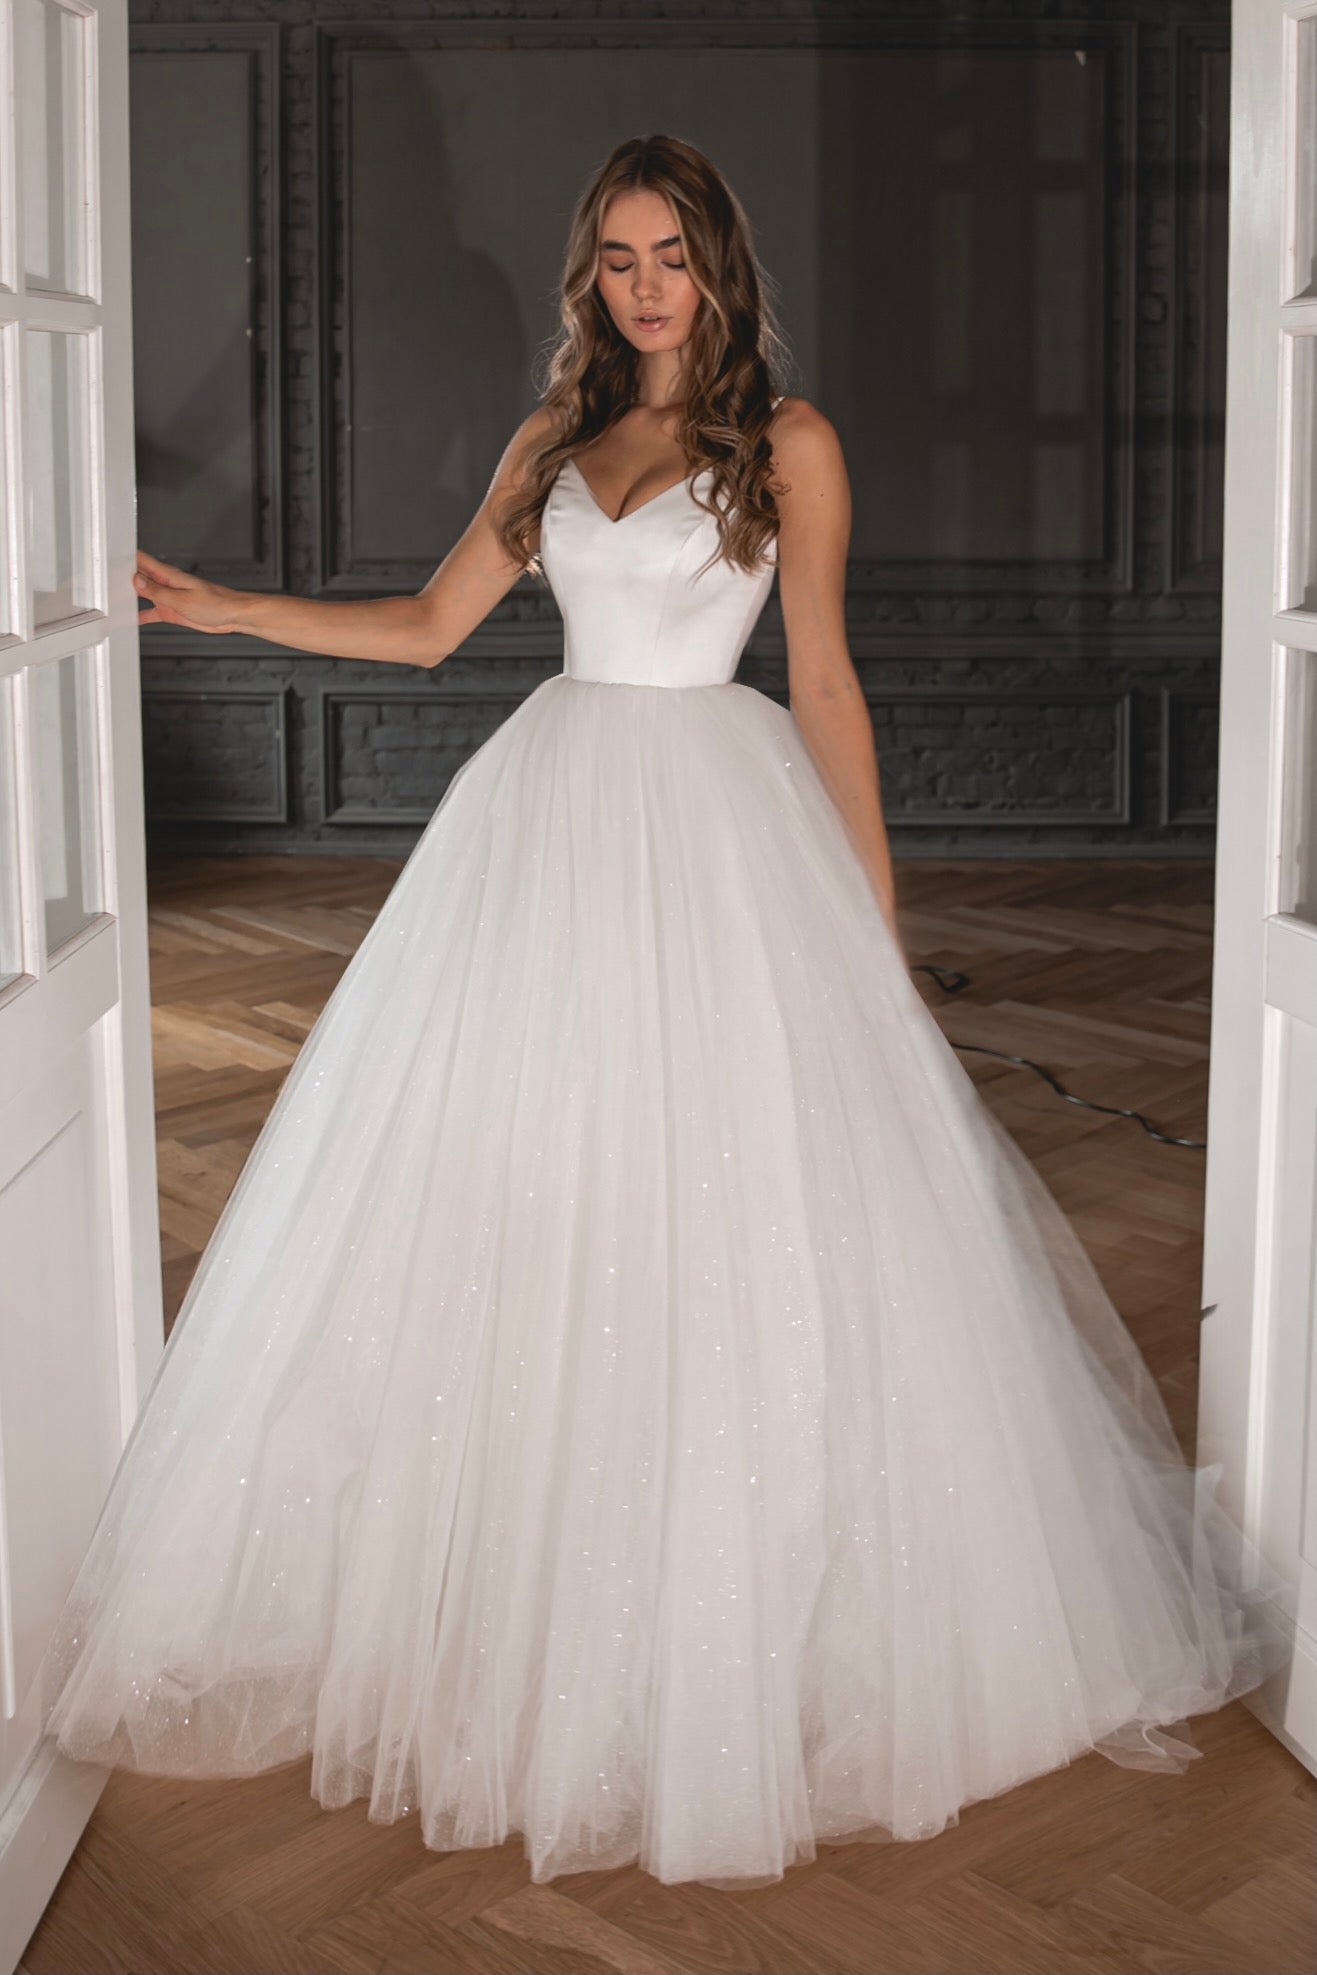 Tulle Ball Gown Wedding Dress With Sweetheart Neckline And Spaghetti Straps  | Kleinfeld Bridal